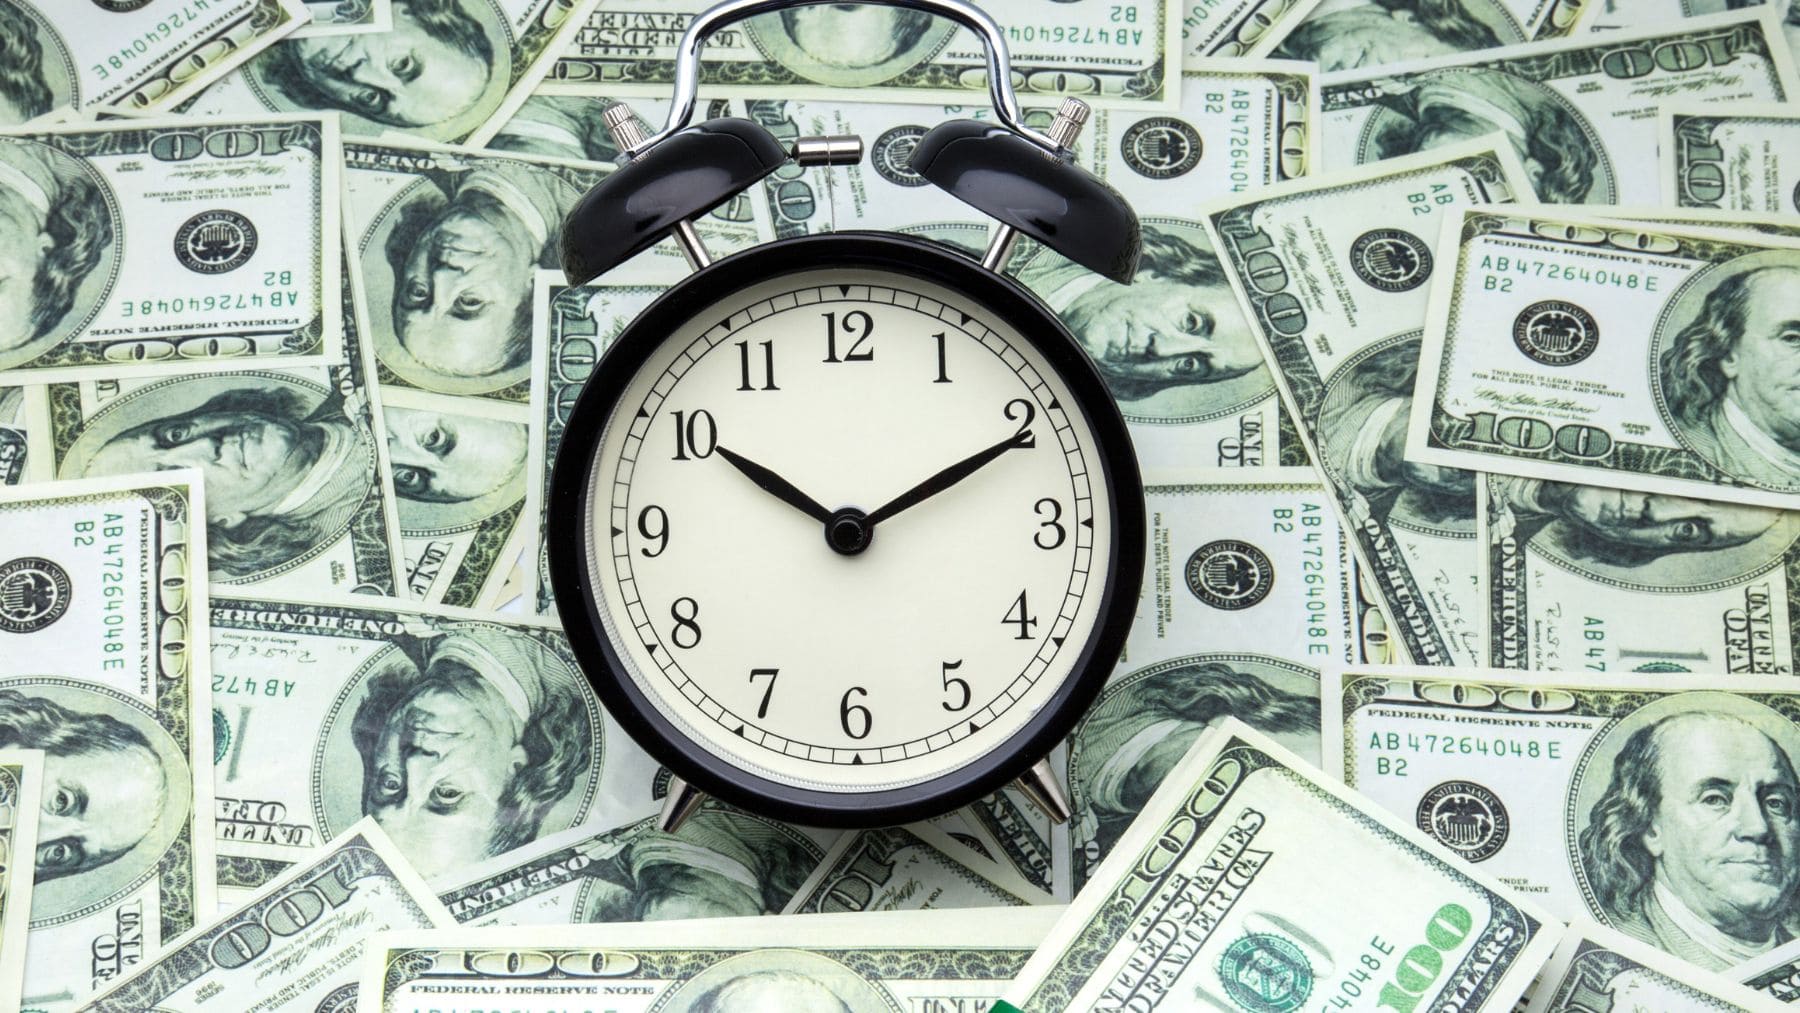 A clock and the money from the Supplemental Security Income